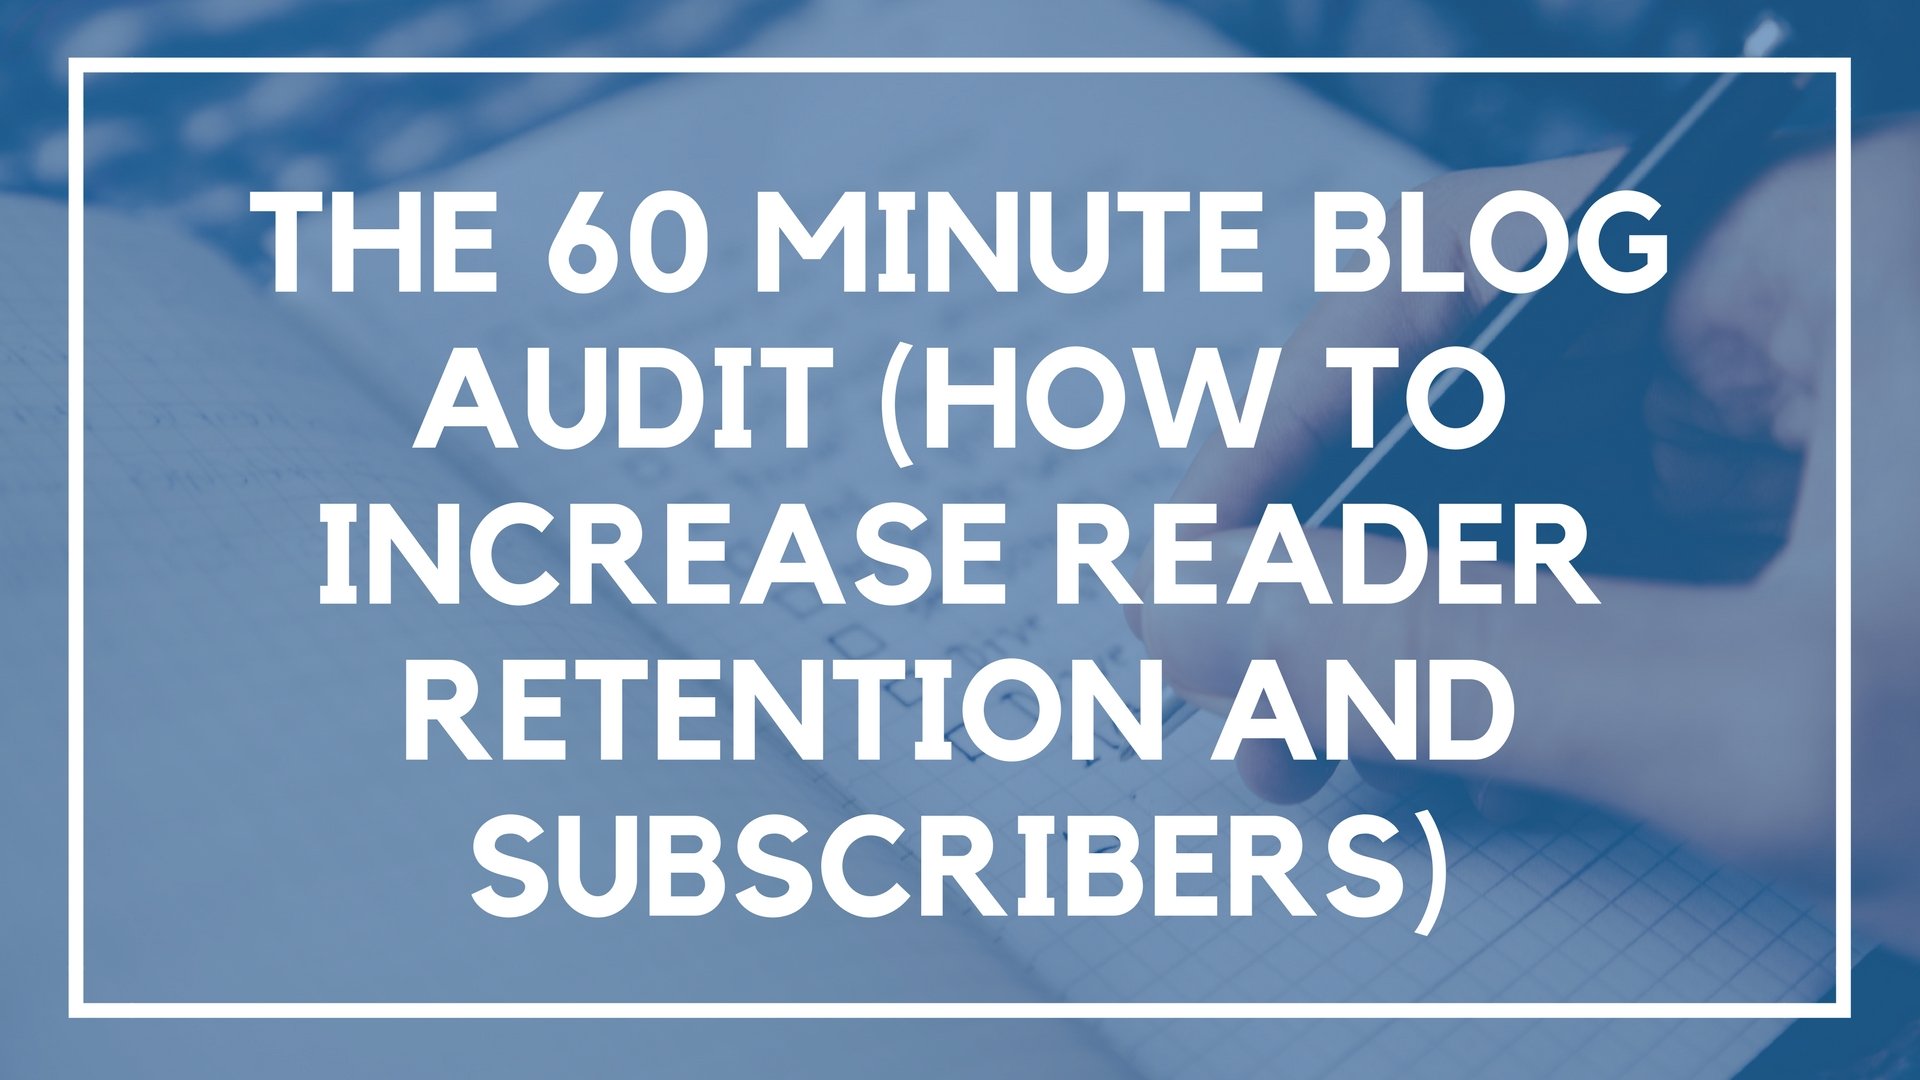 The 60 Minute Blog Audit (How to Increase Reader Retention and Subscribers)